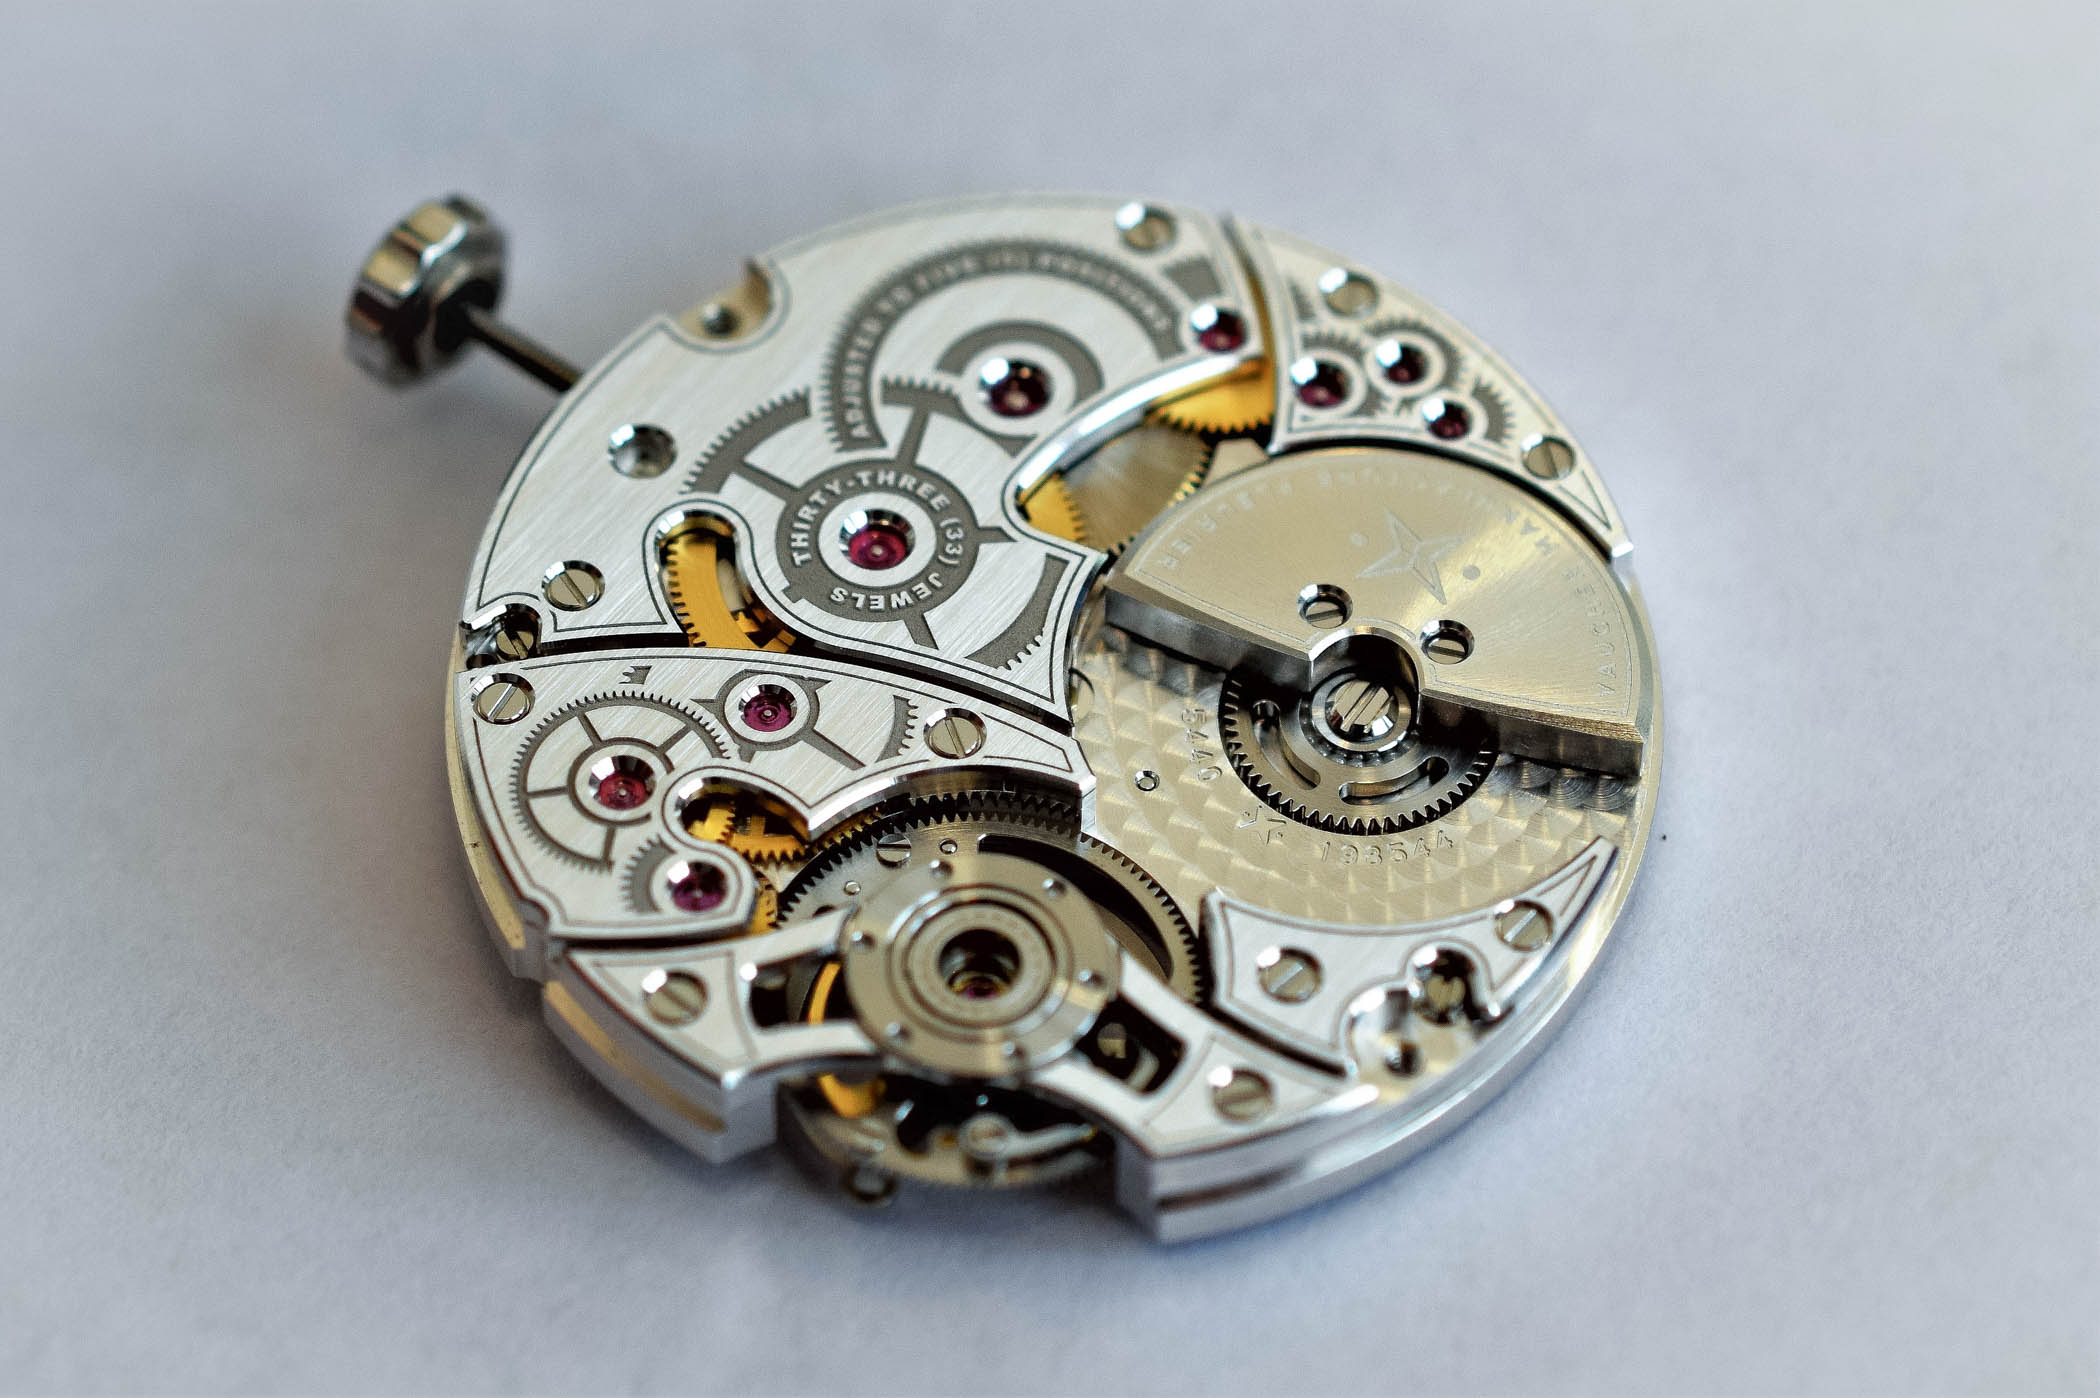 Inside Vaucher Manufacture Fleurier – How Exactly Watch Parts Are Manufactured - 11